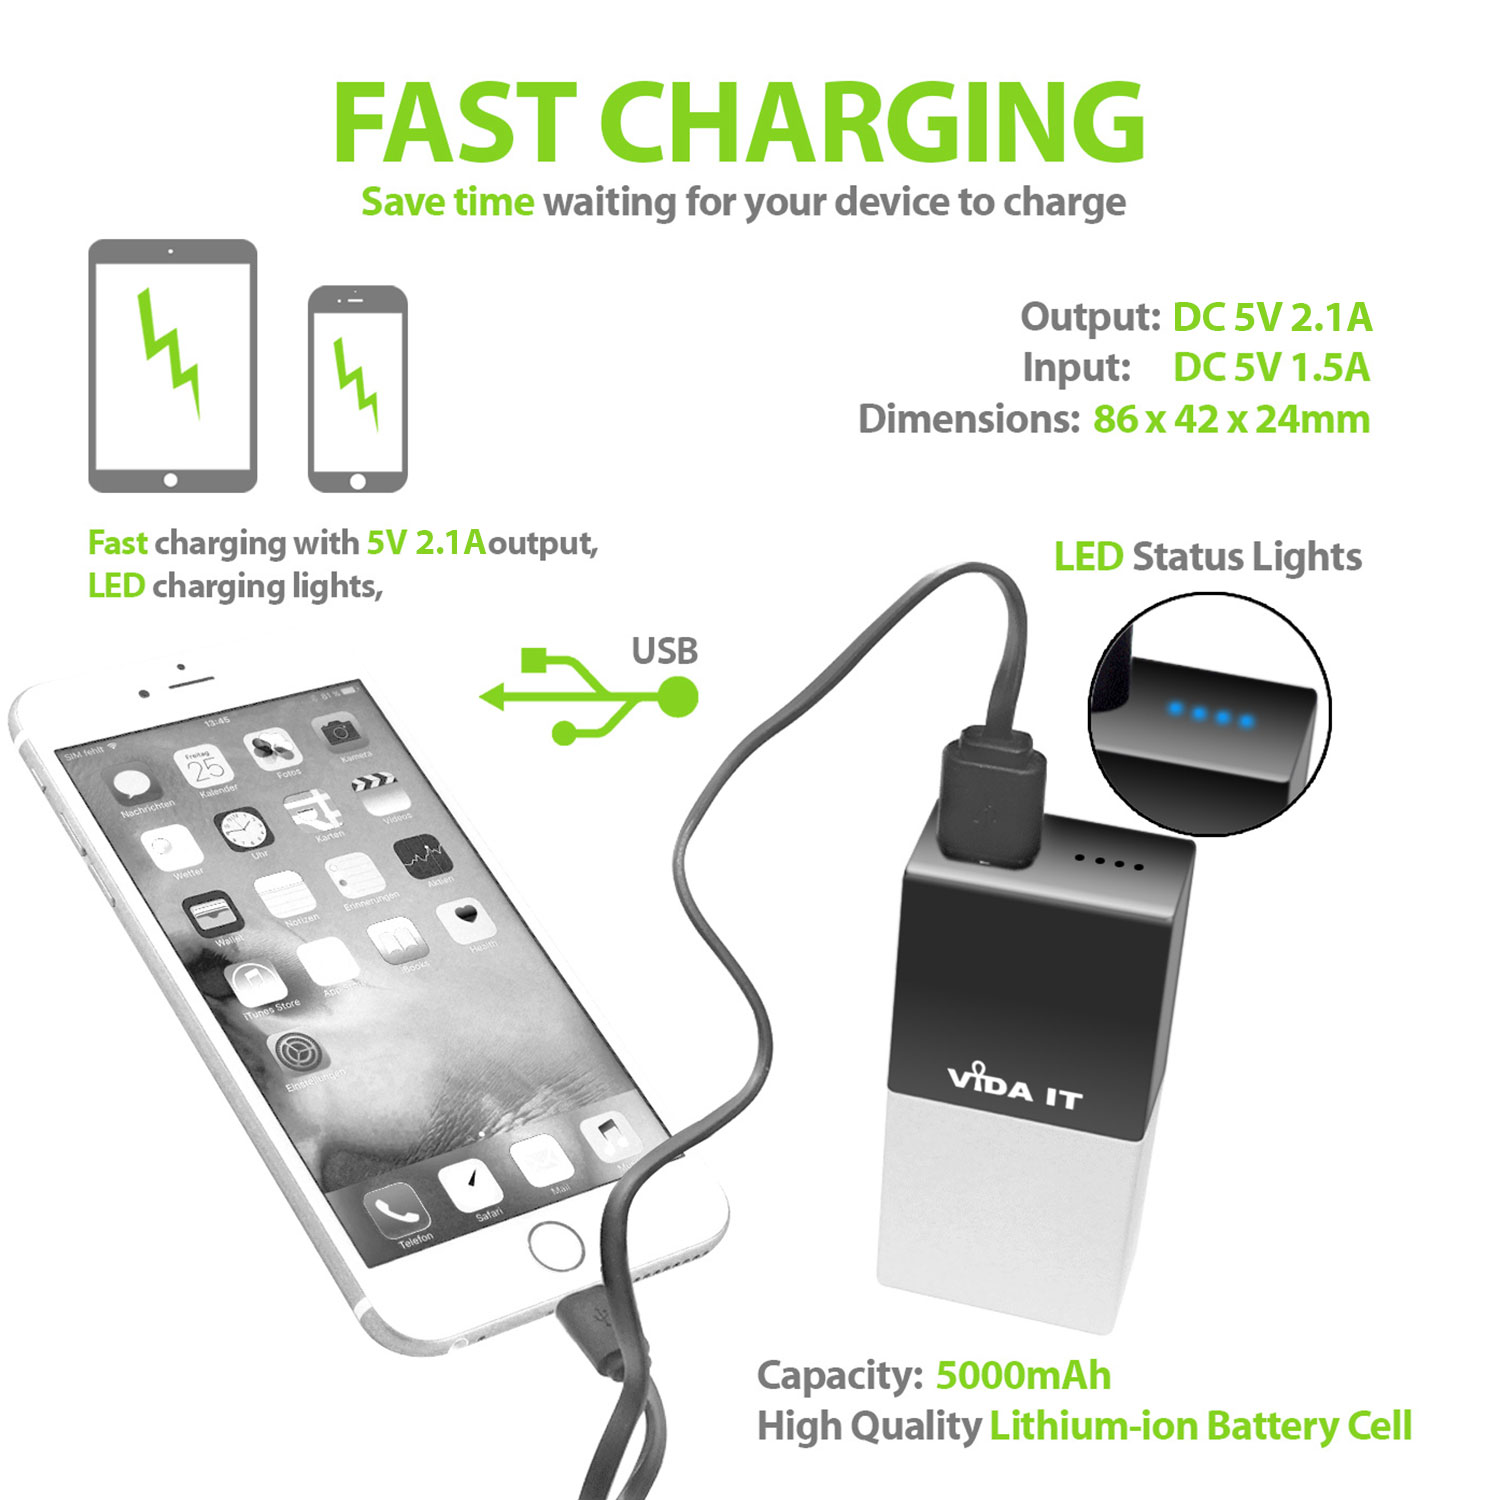 F50 - Strong Portable 5000mAh capacity Compact Power Bank Travel Emergency USB Charger External Battery Pack High Power Output 2.1A with Micro-USB charging cable and iPhone lightning and USB C type-c adapters for mobile phone smartphone.